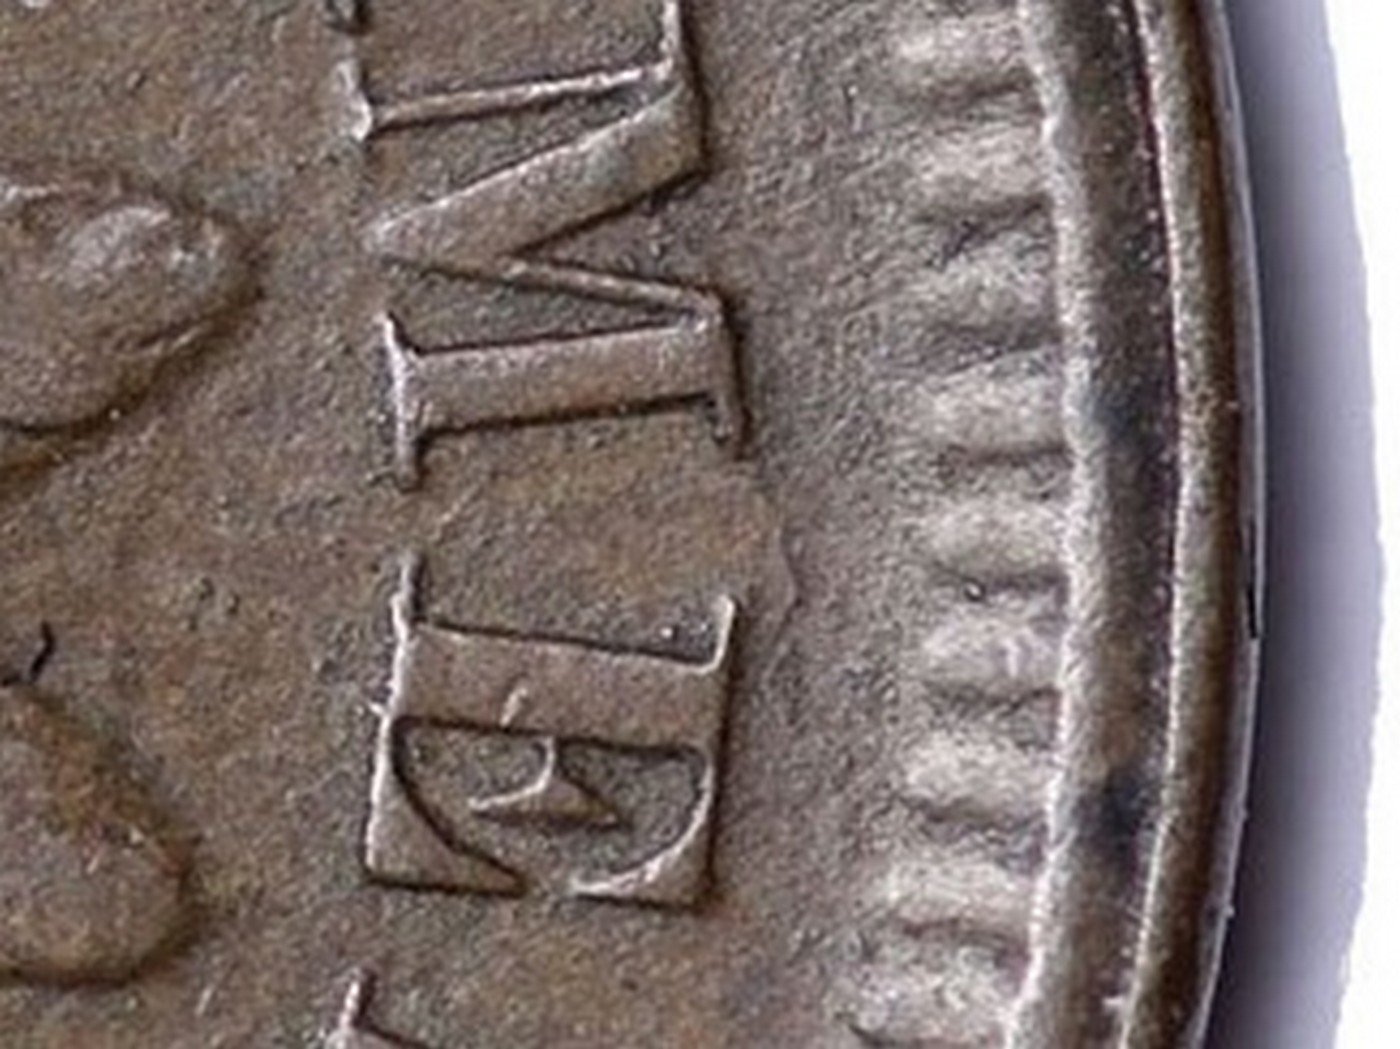 1866 RPD-008 - Indian Head Penny - Photo by David Poliquin